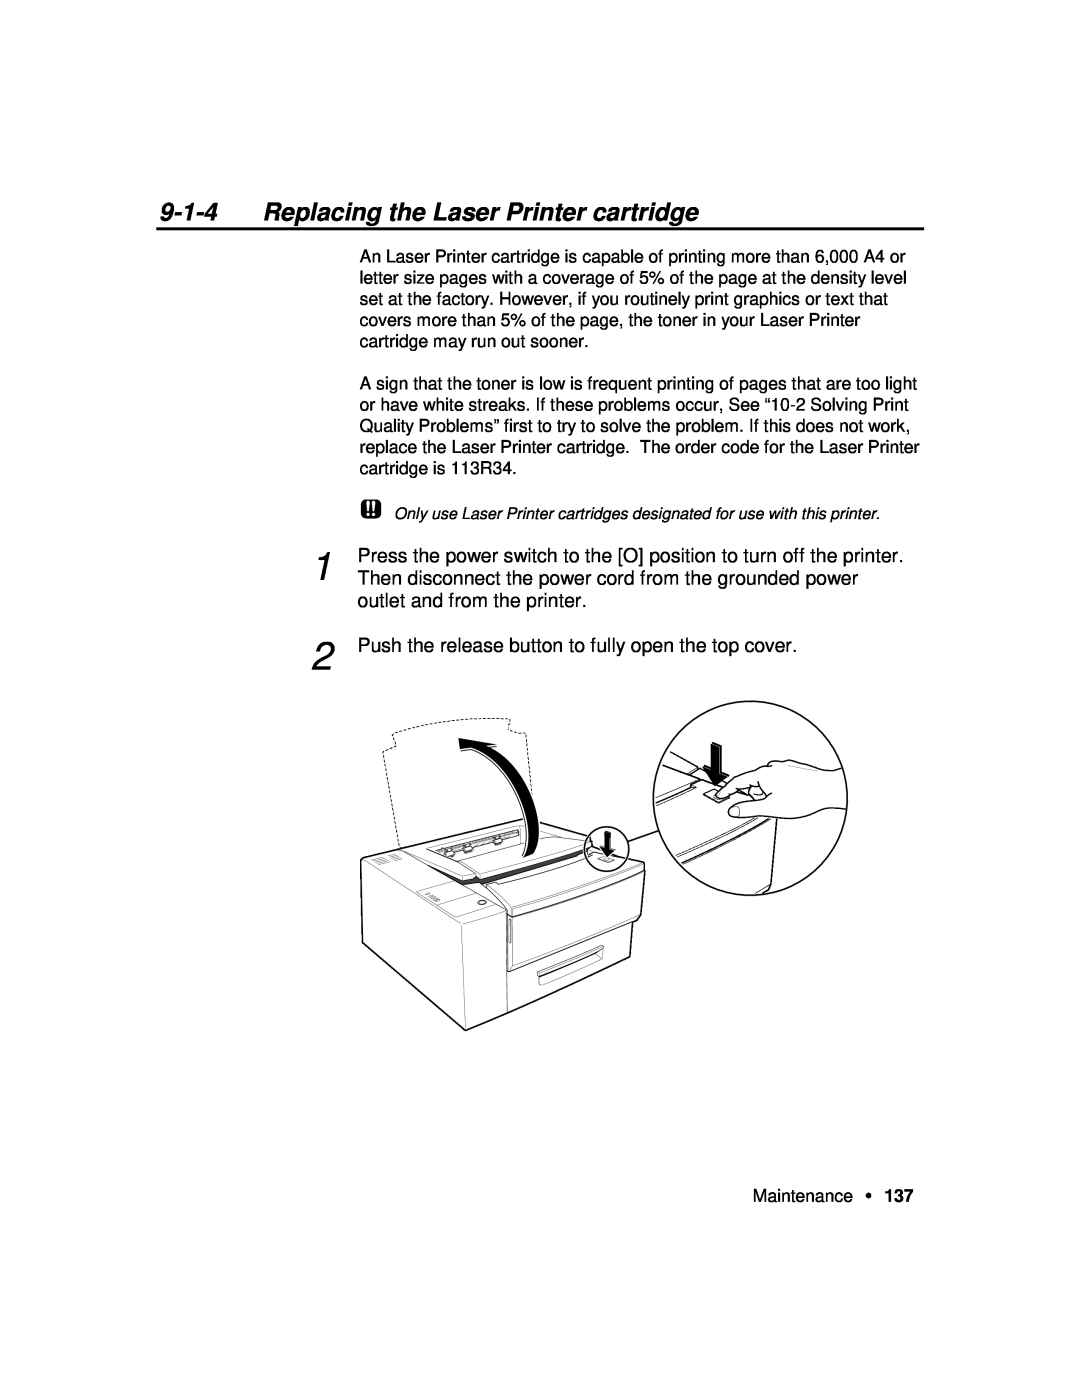 Xerox P12 manual Replacing the Laser Printer cartridge, Press the power switch to the O position to turn off the printer 